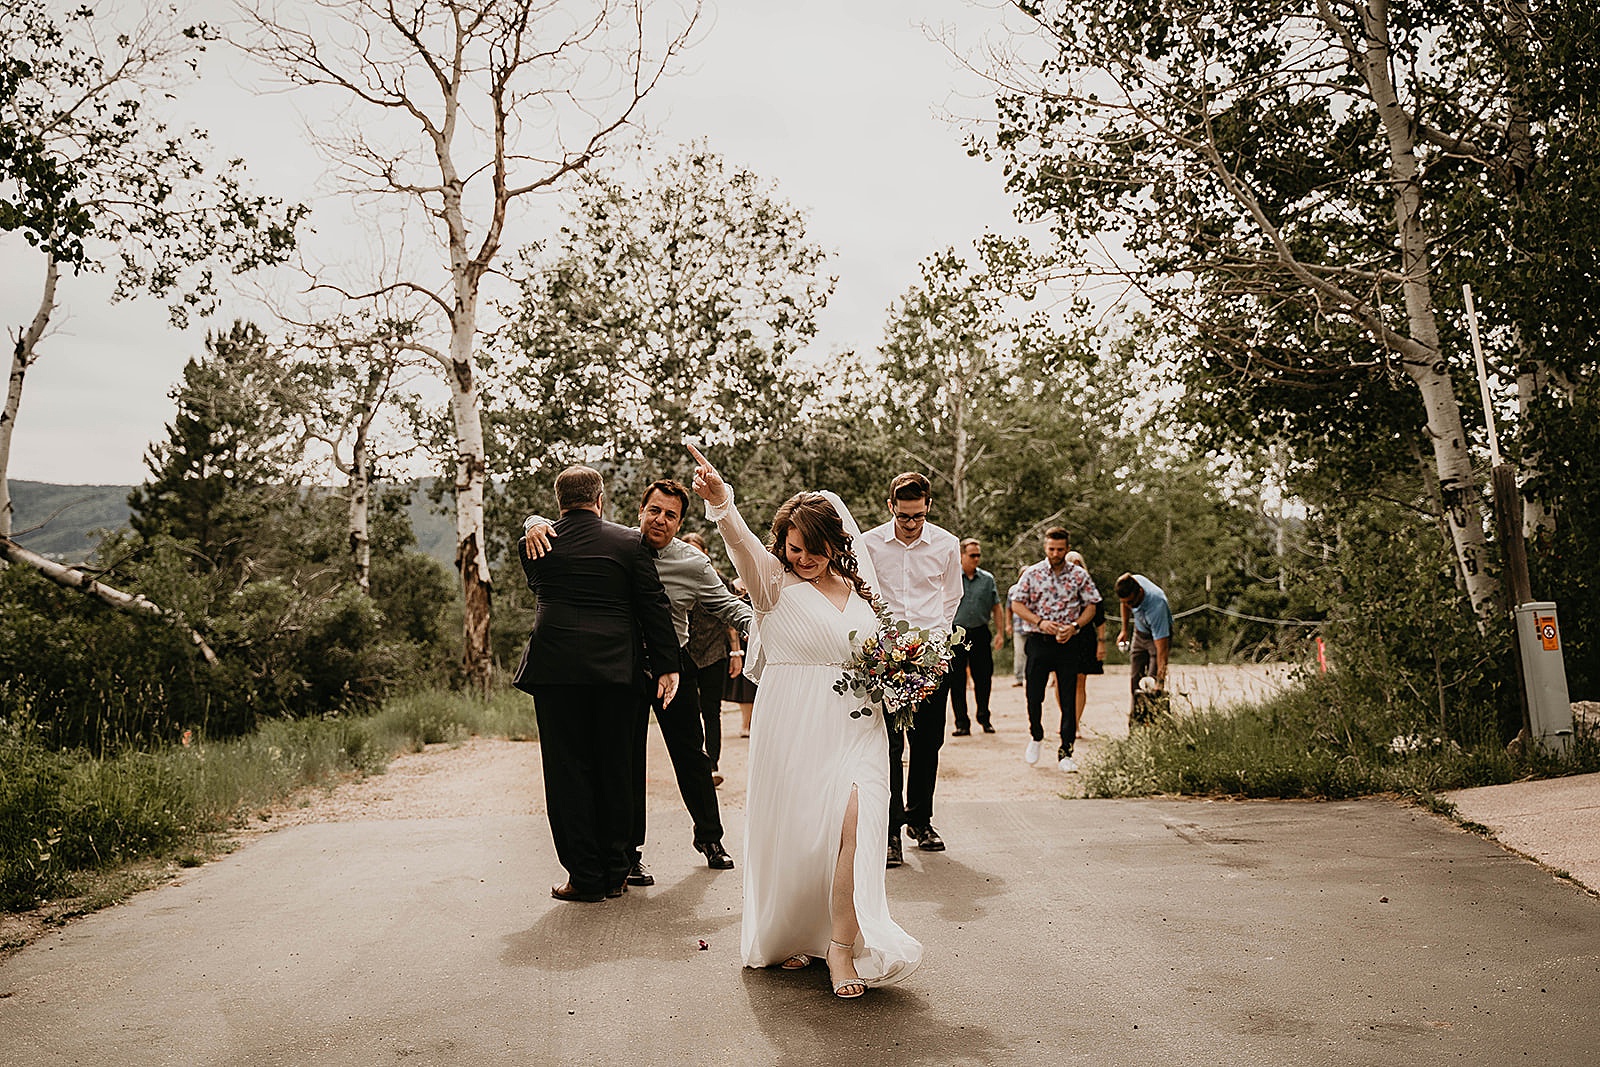 Rustic Colorado Elopement Ceremony Just Married by Krystal Capone Photography